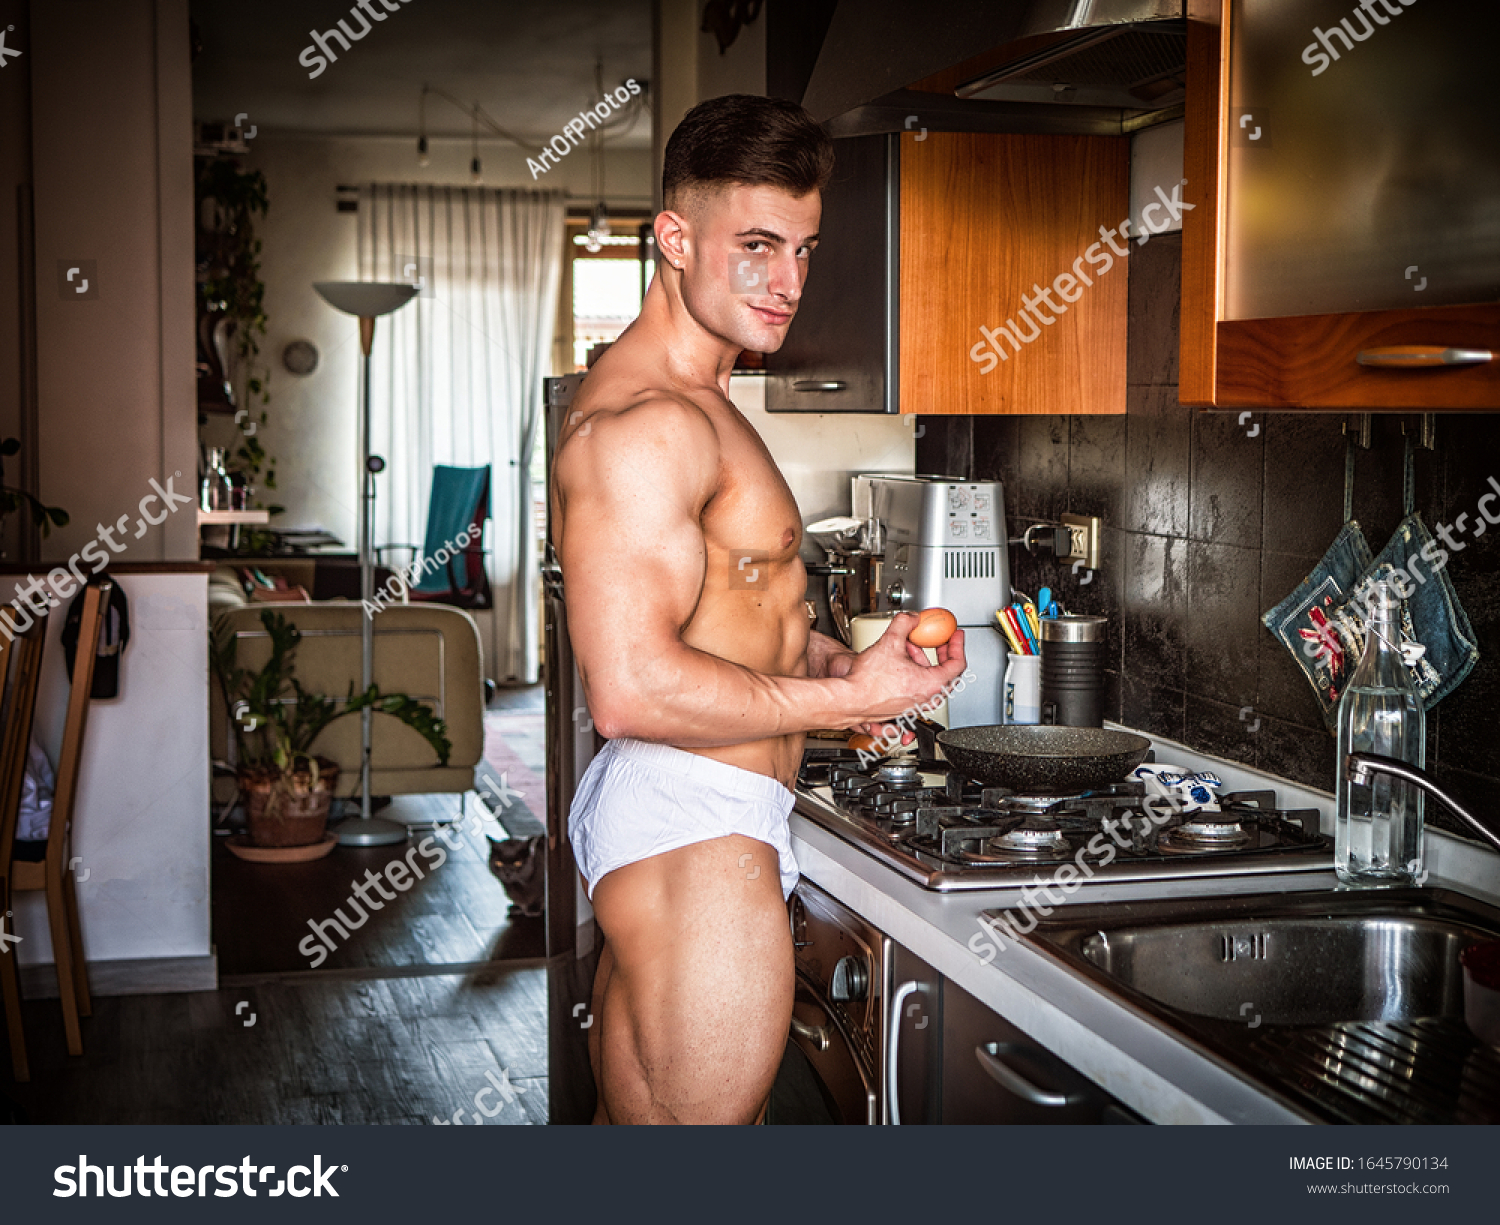 Cooking Naked Images Stock Photos Vectors Shutterstock